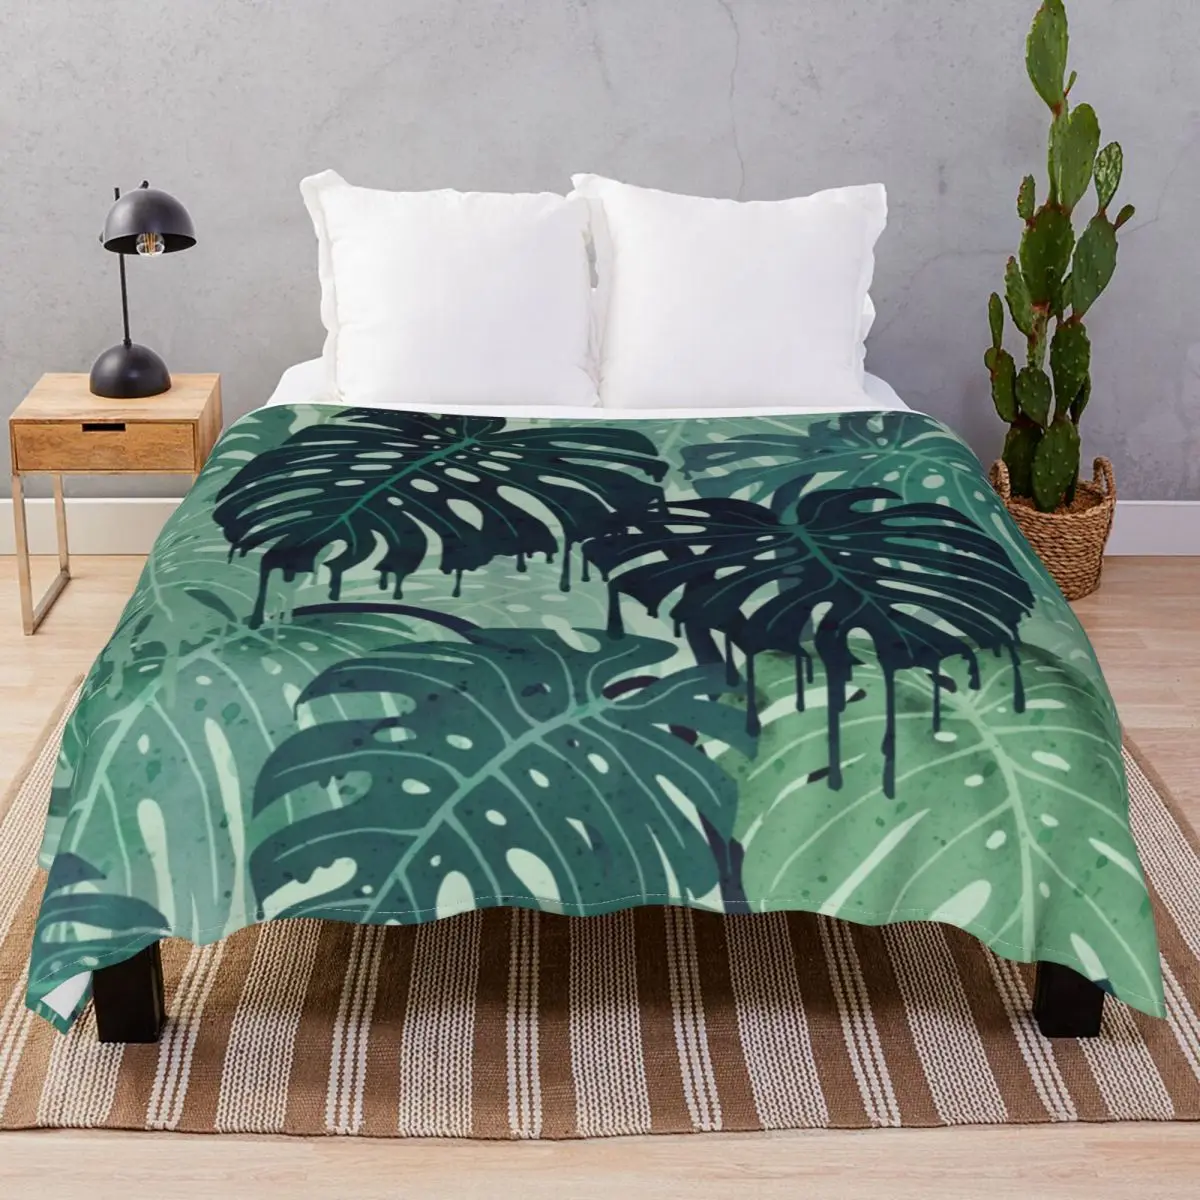 Monstera Melt In Green Blanket Flannel Spring Autumn Multifunction Throw Blankets for Bed Home Couch Travel Office